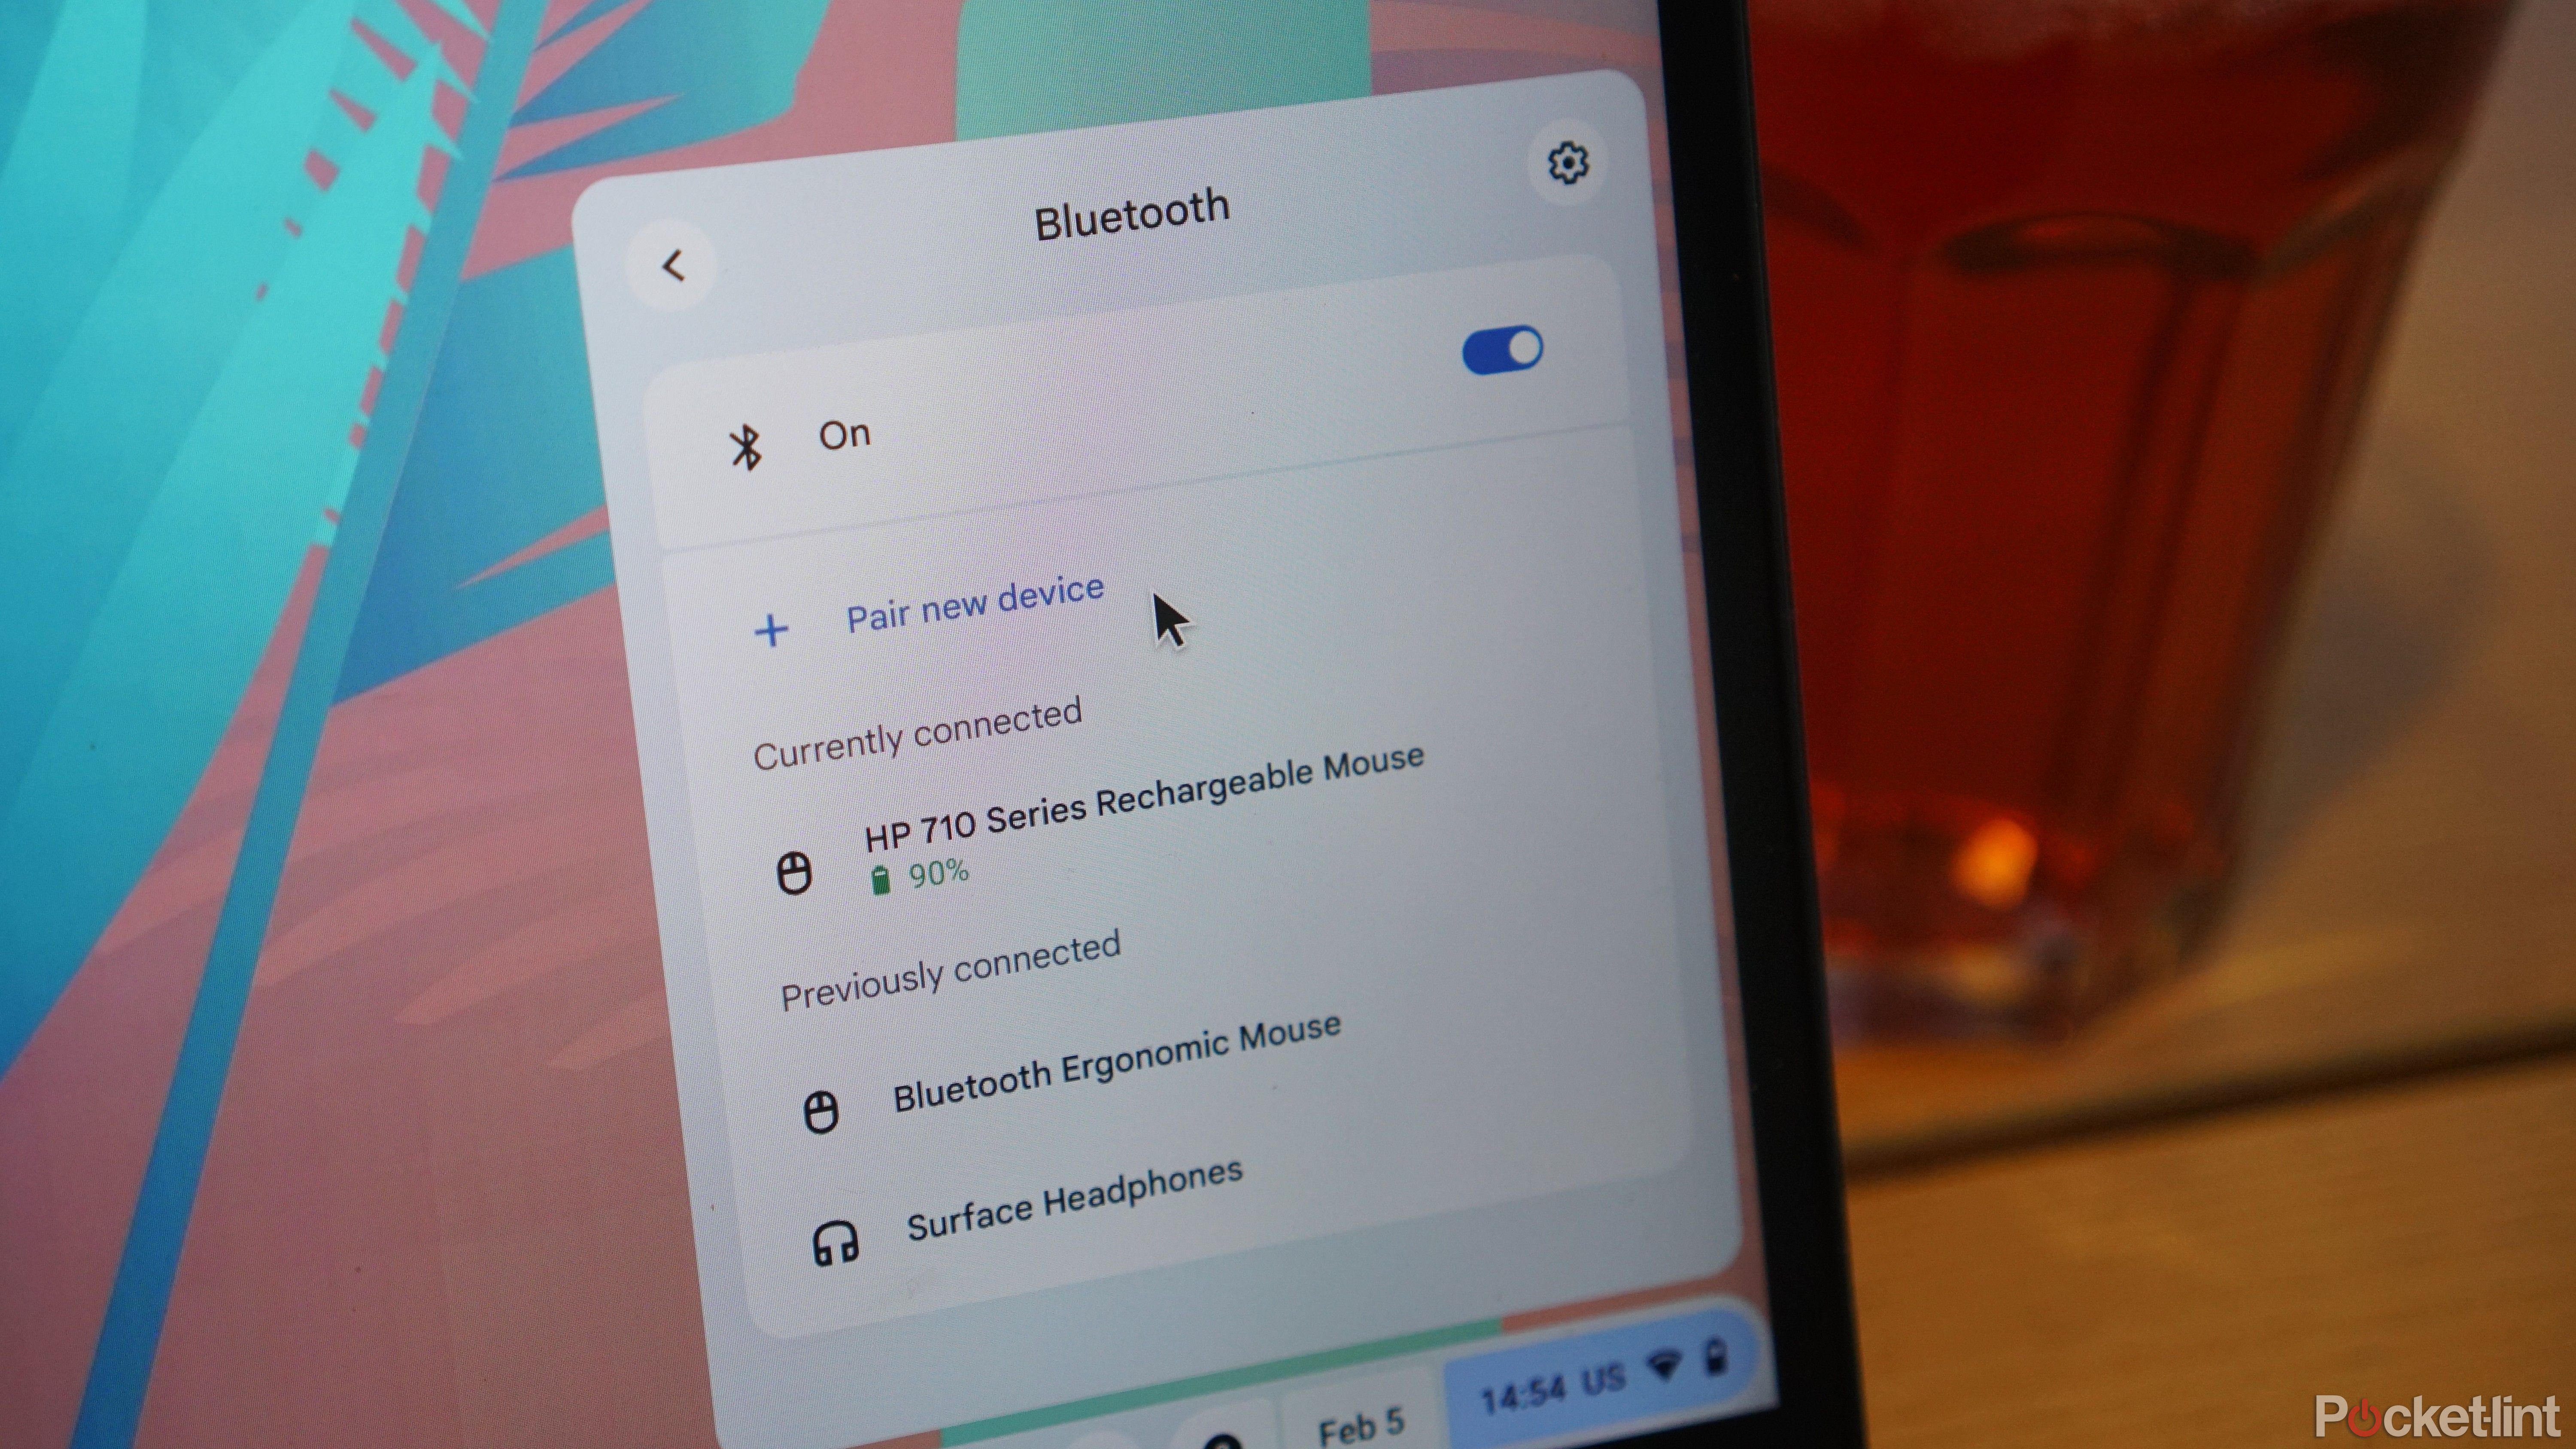 The Bluetooth settings panel in ChromeOS's Quick Settings.